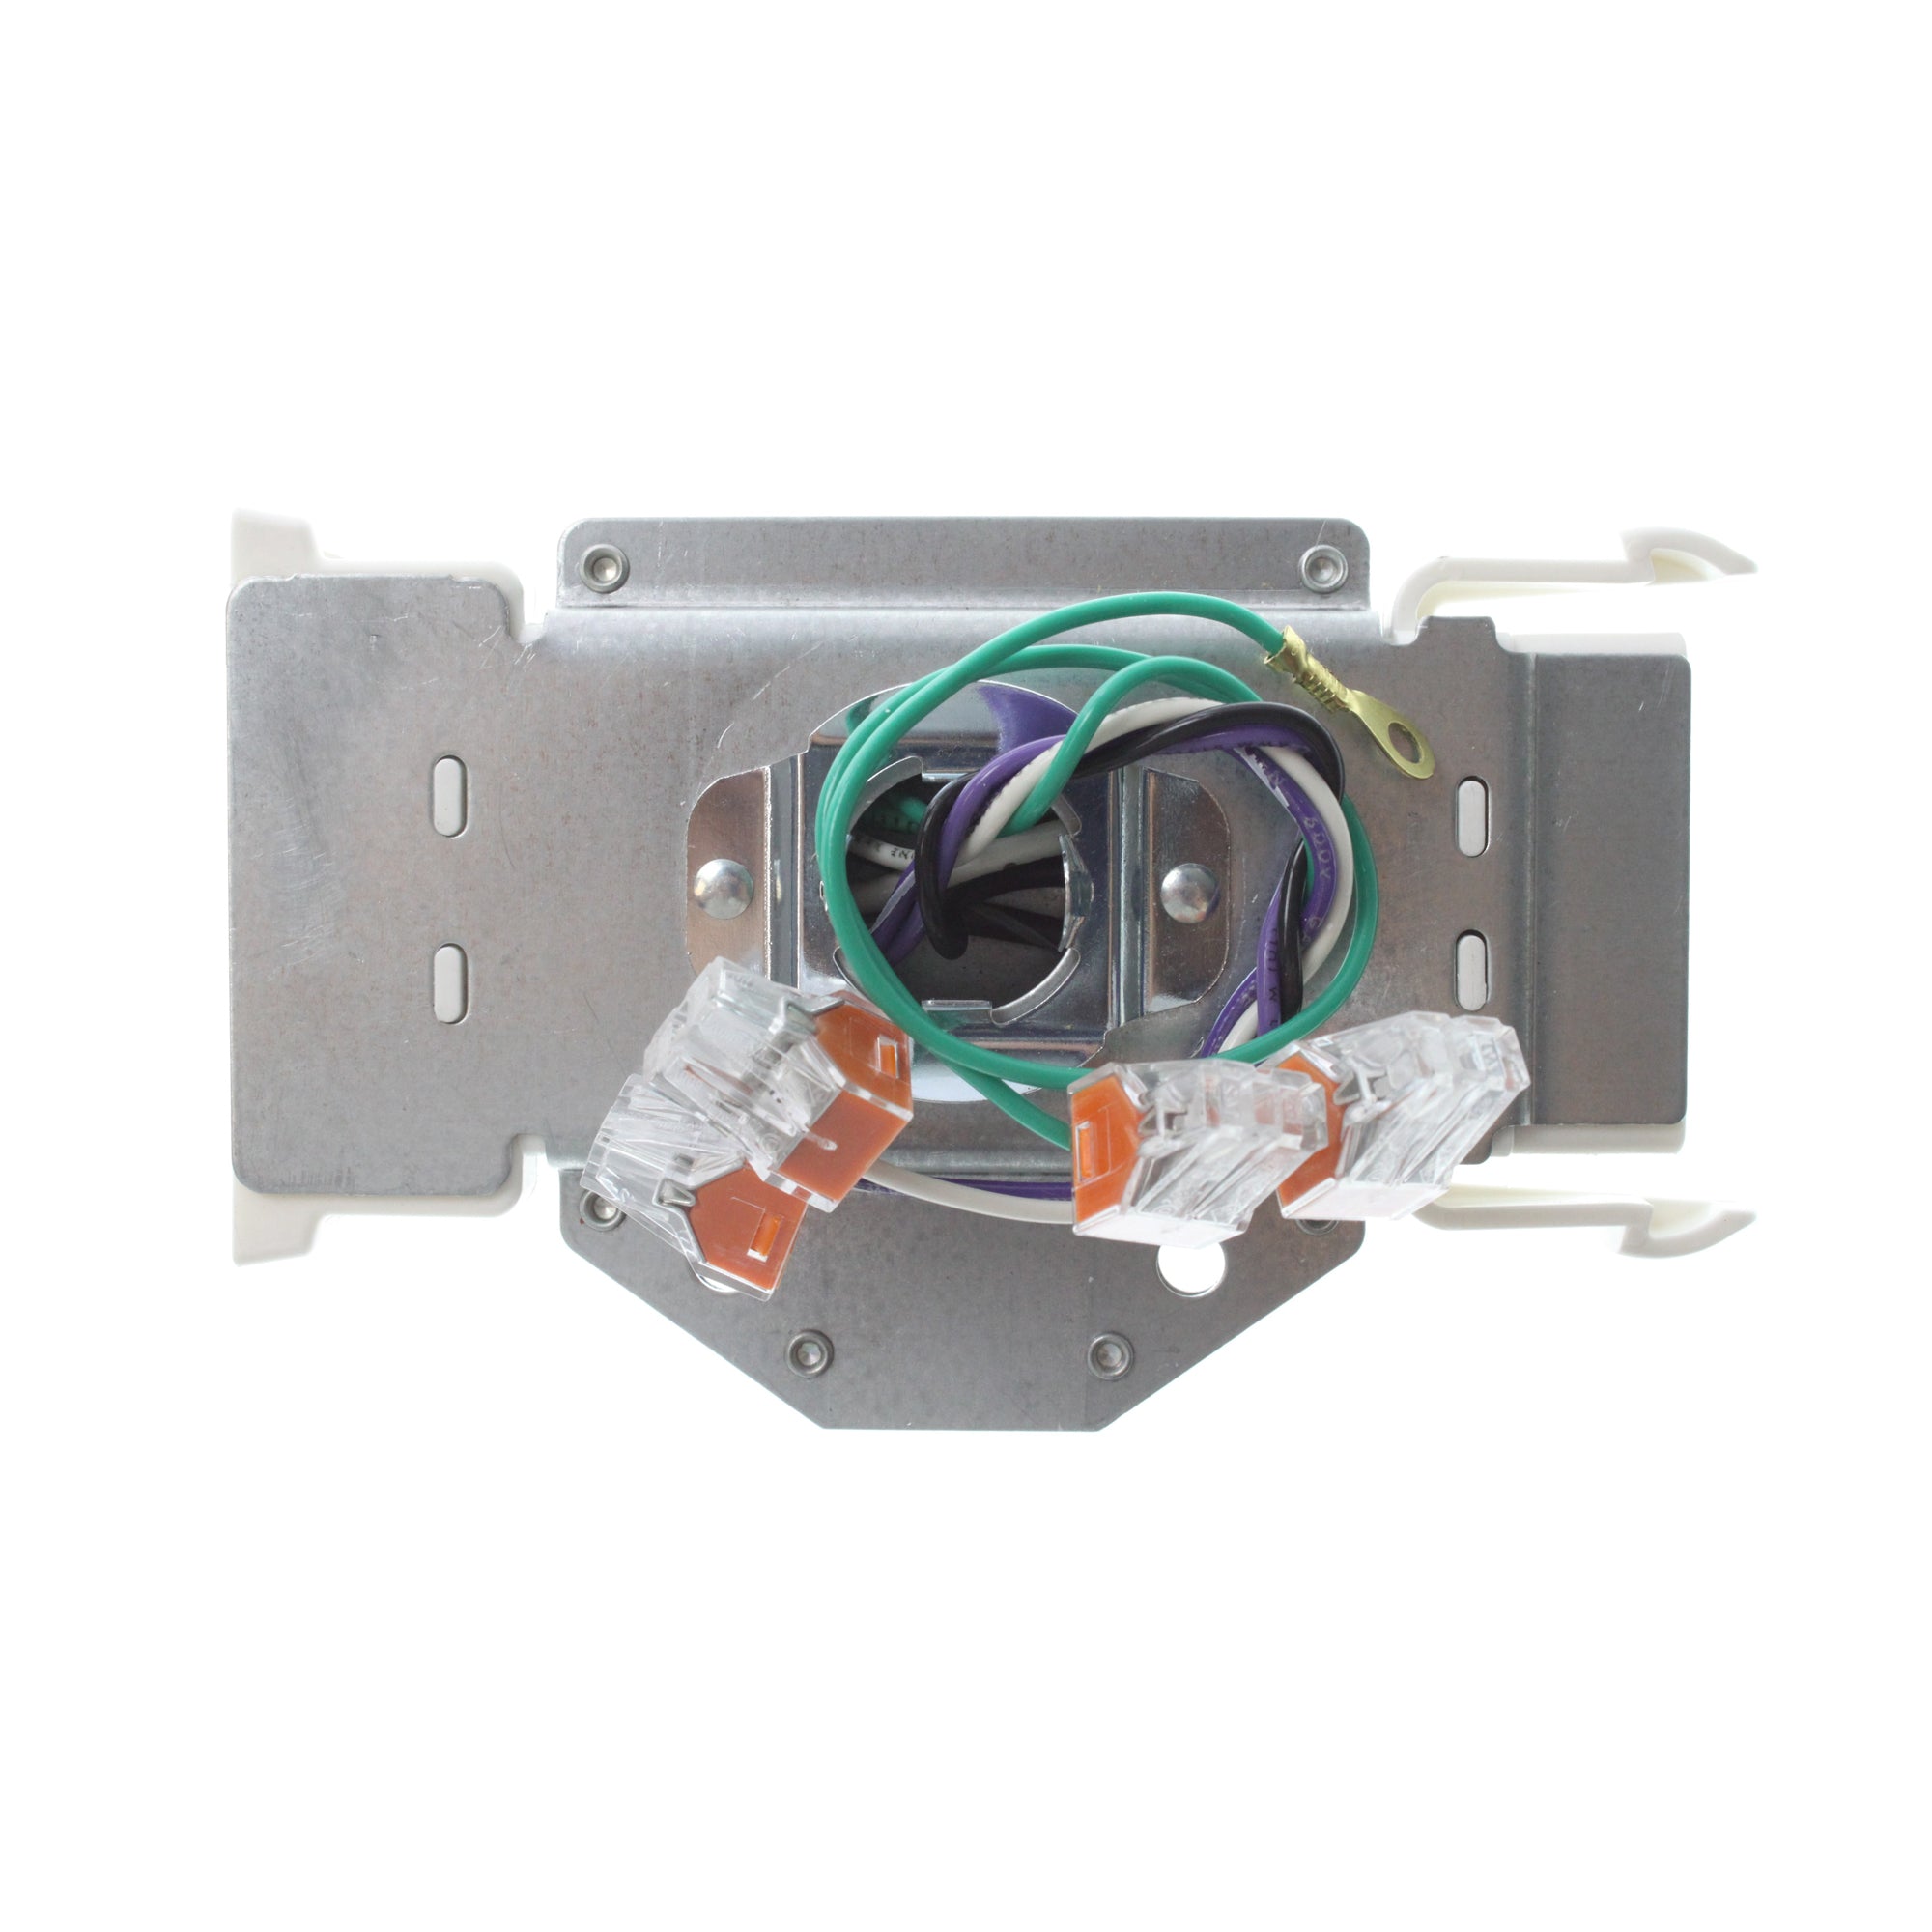 Modular Wiring Systems, COOPER MWS 27FF12/4G5LT MODULAR WIRING SYSTEM FIXTURE CONNECTOR, 277V, 20A, #12